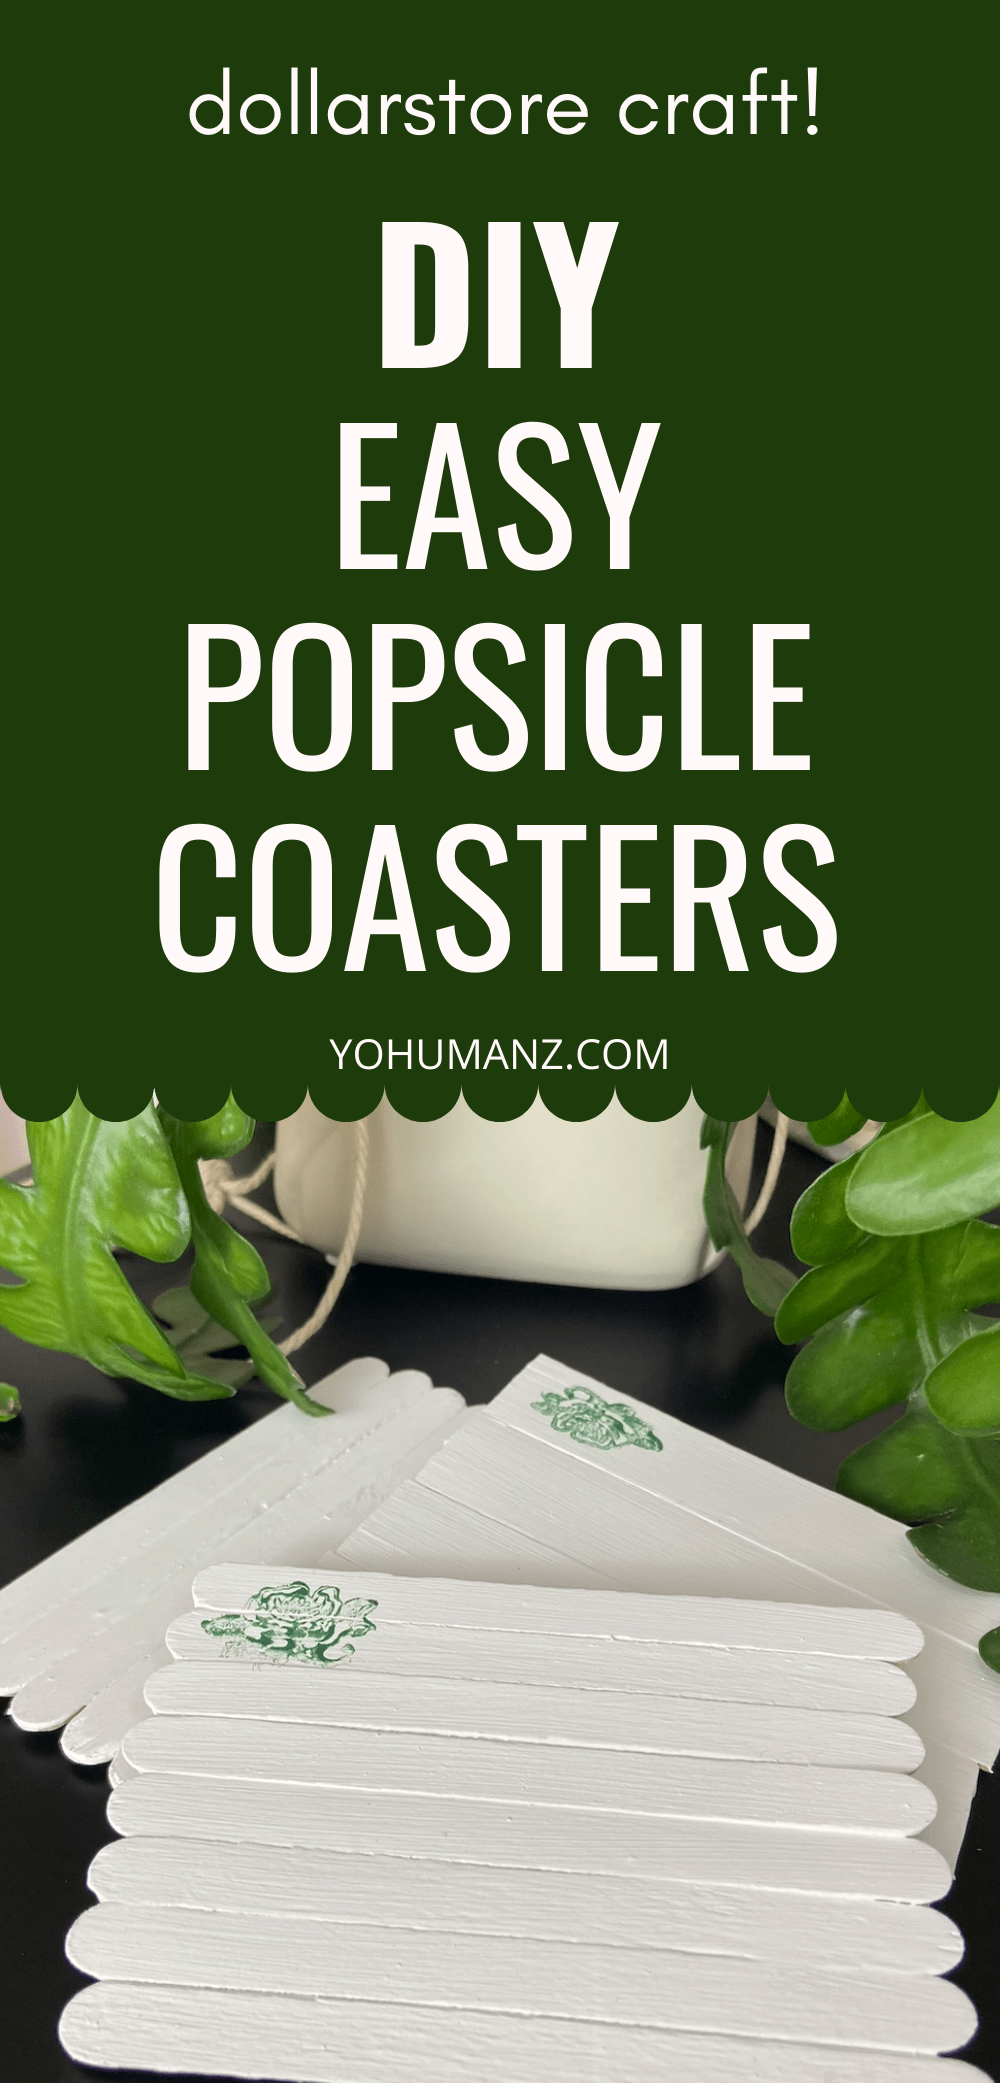 diy coasters popsicle stick dollarstore craft